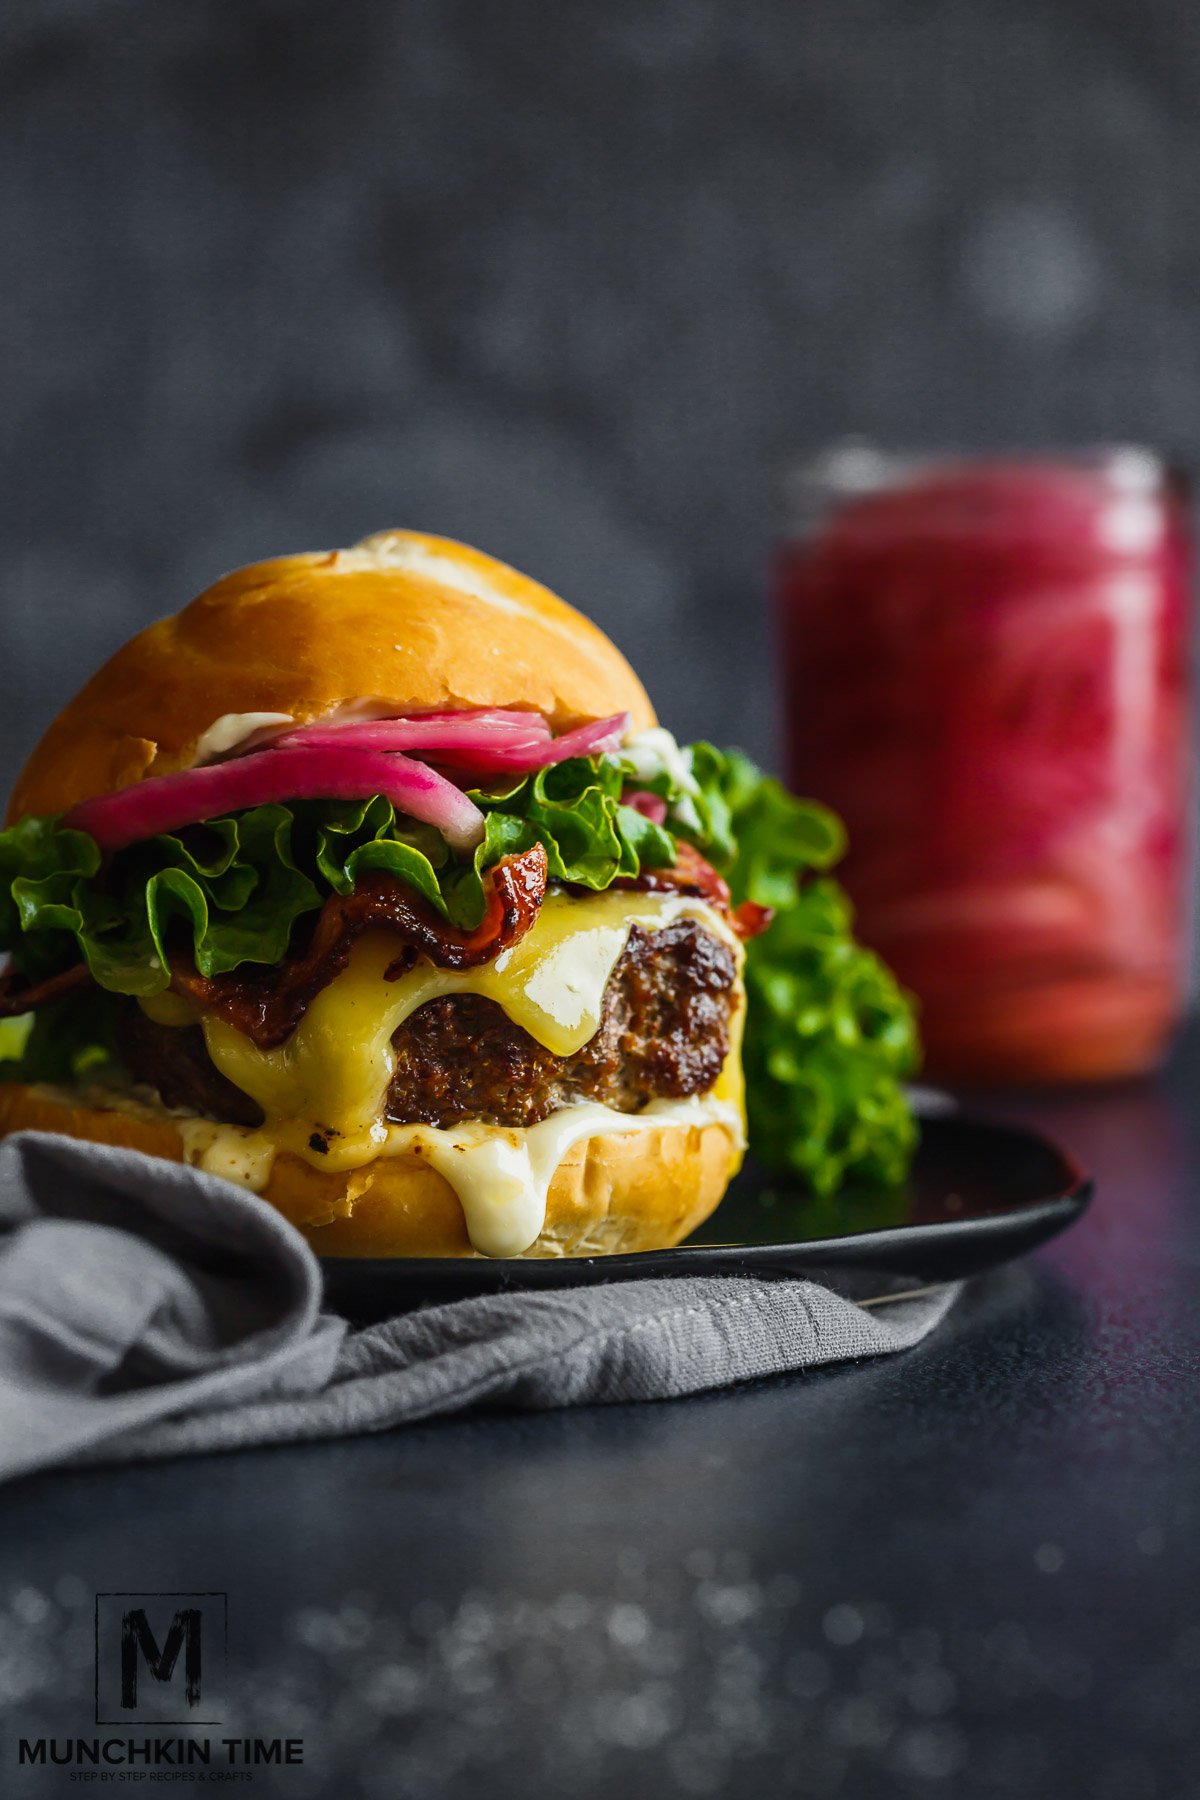 Ground beef & ground pork burger with cheese, lettuce and pickled red onions.